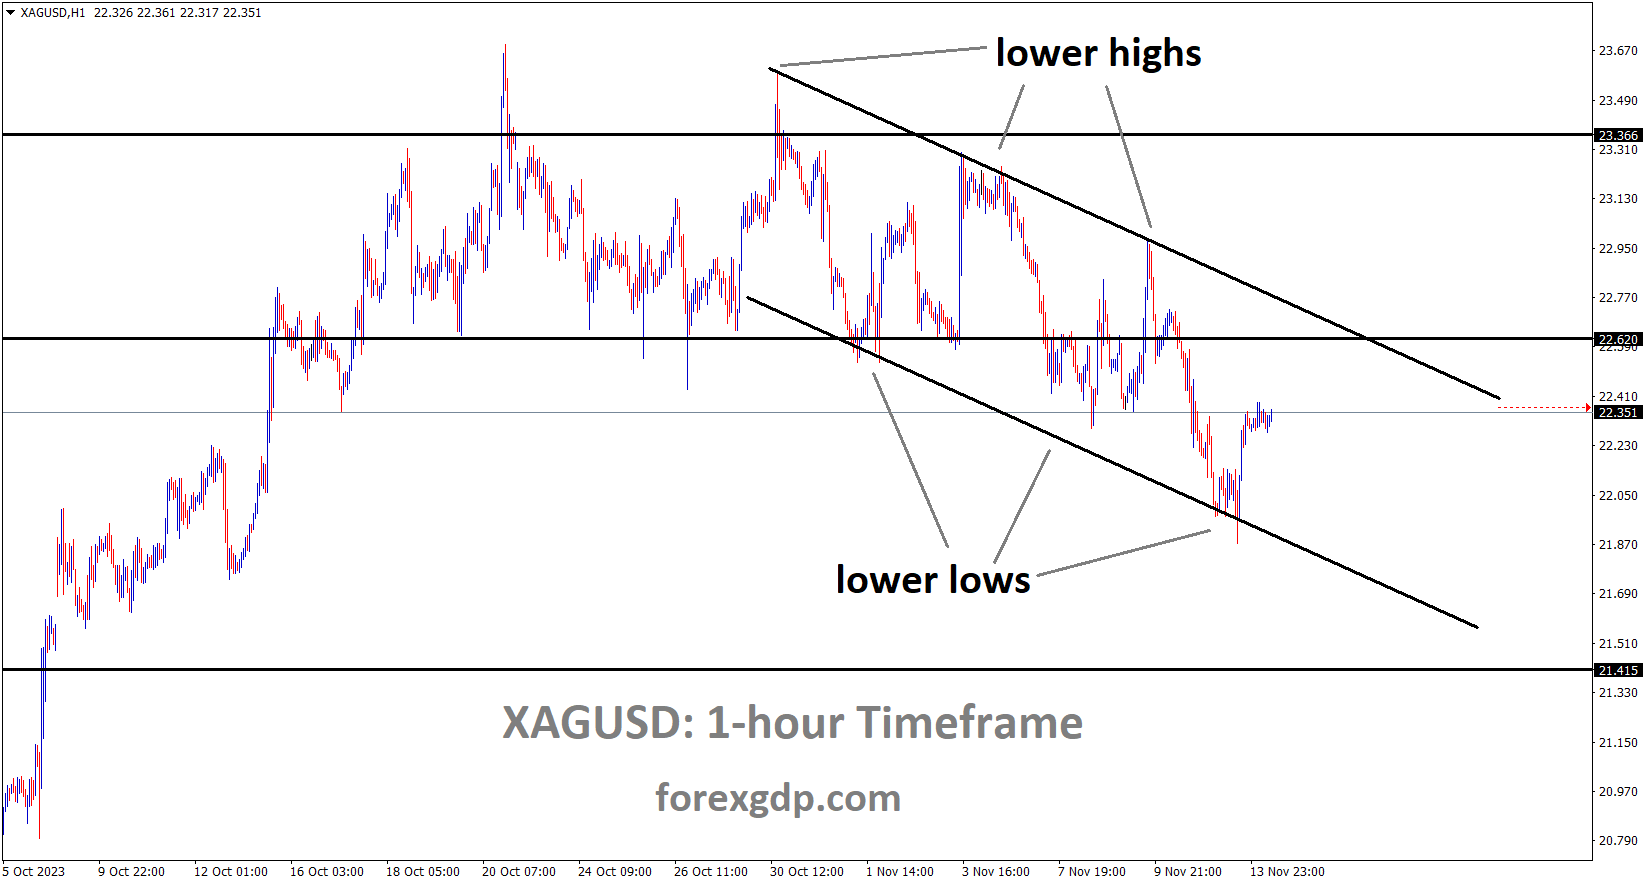 XAGUSD Silver price is moving in the Descending channel and the market has rebounded from the lower low area of the channel